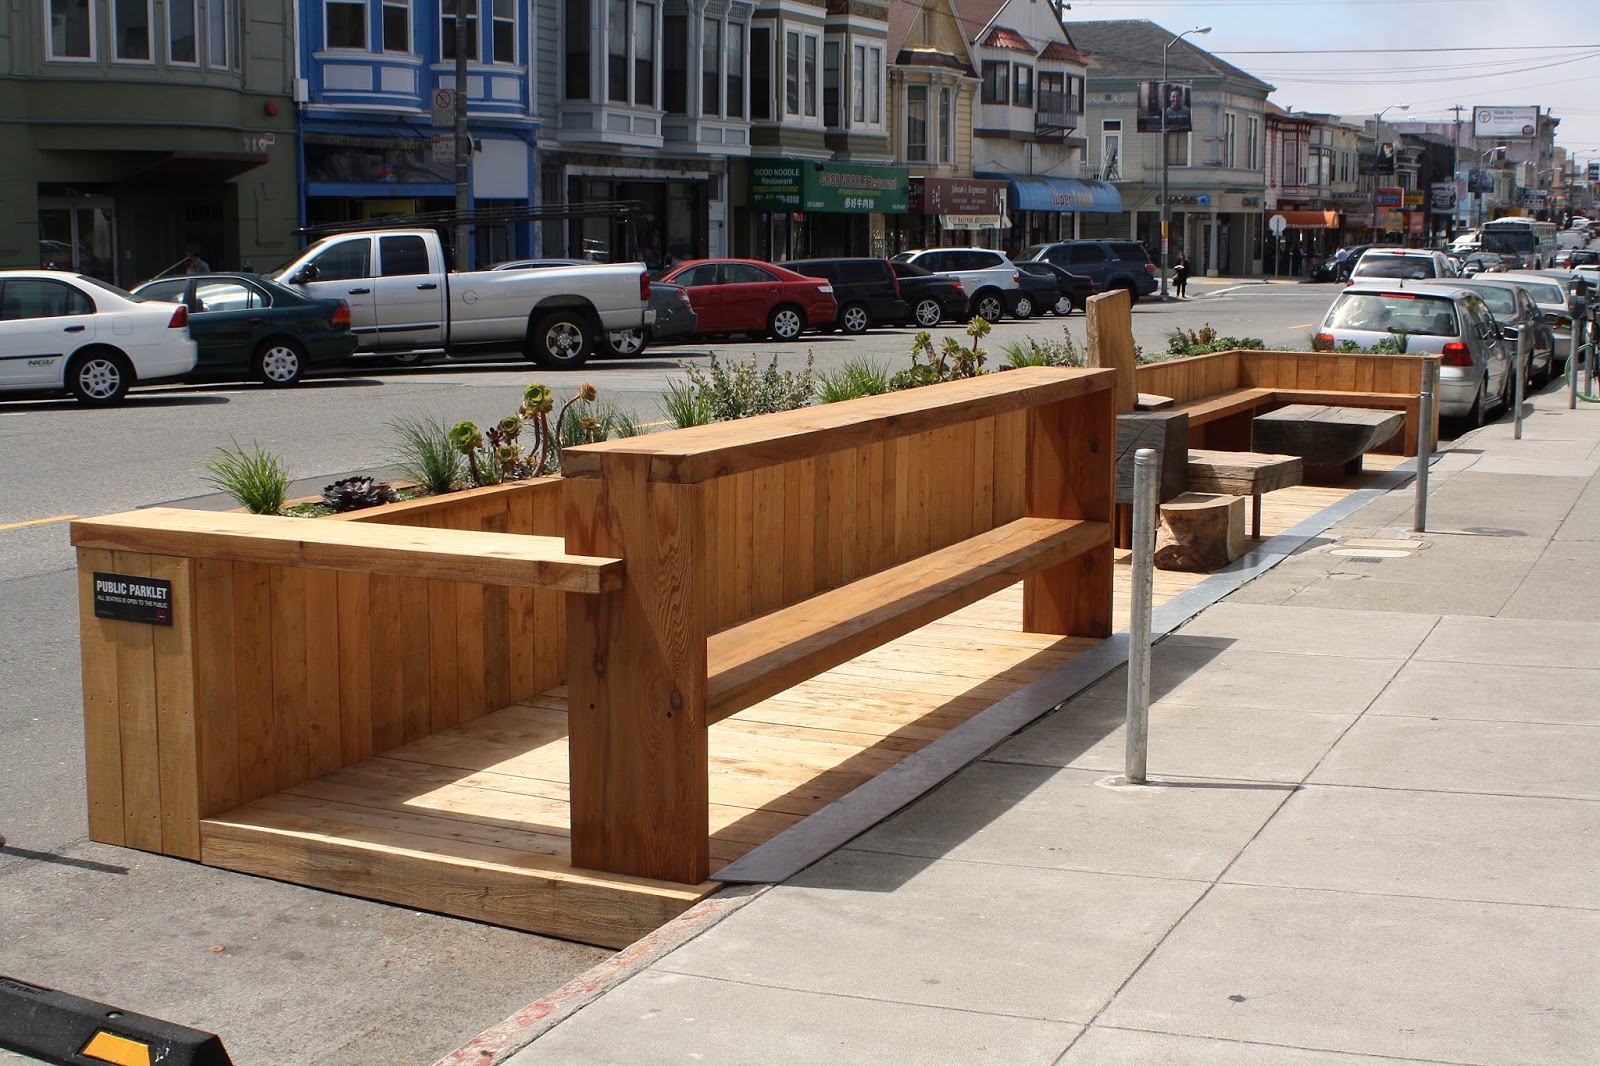 Example of a parklet in San Francisco